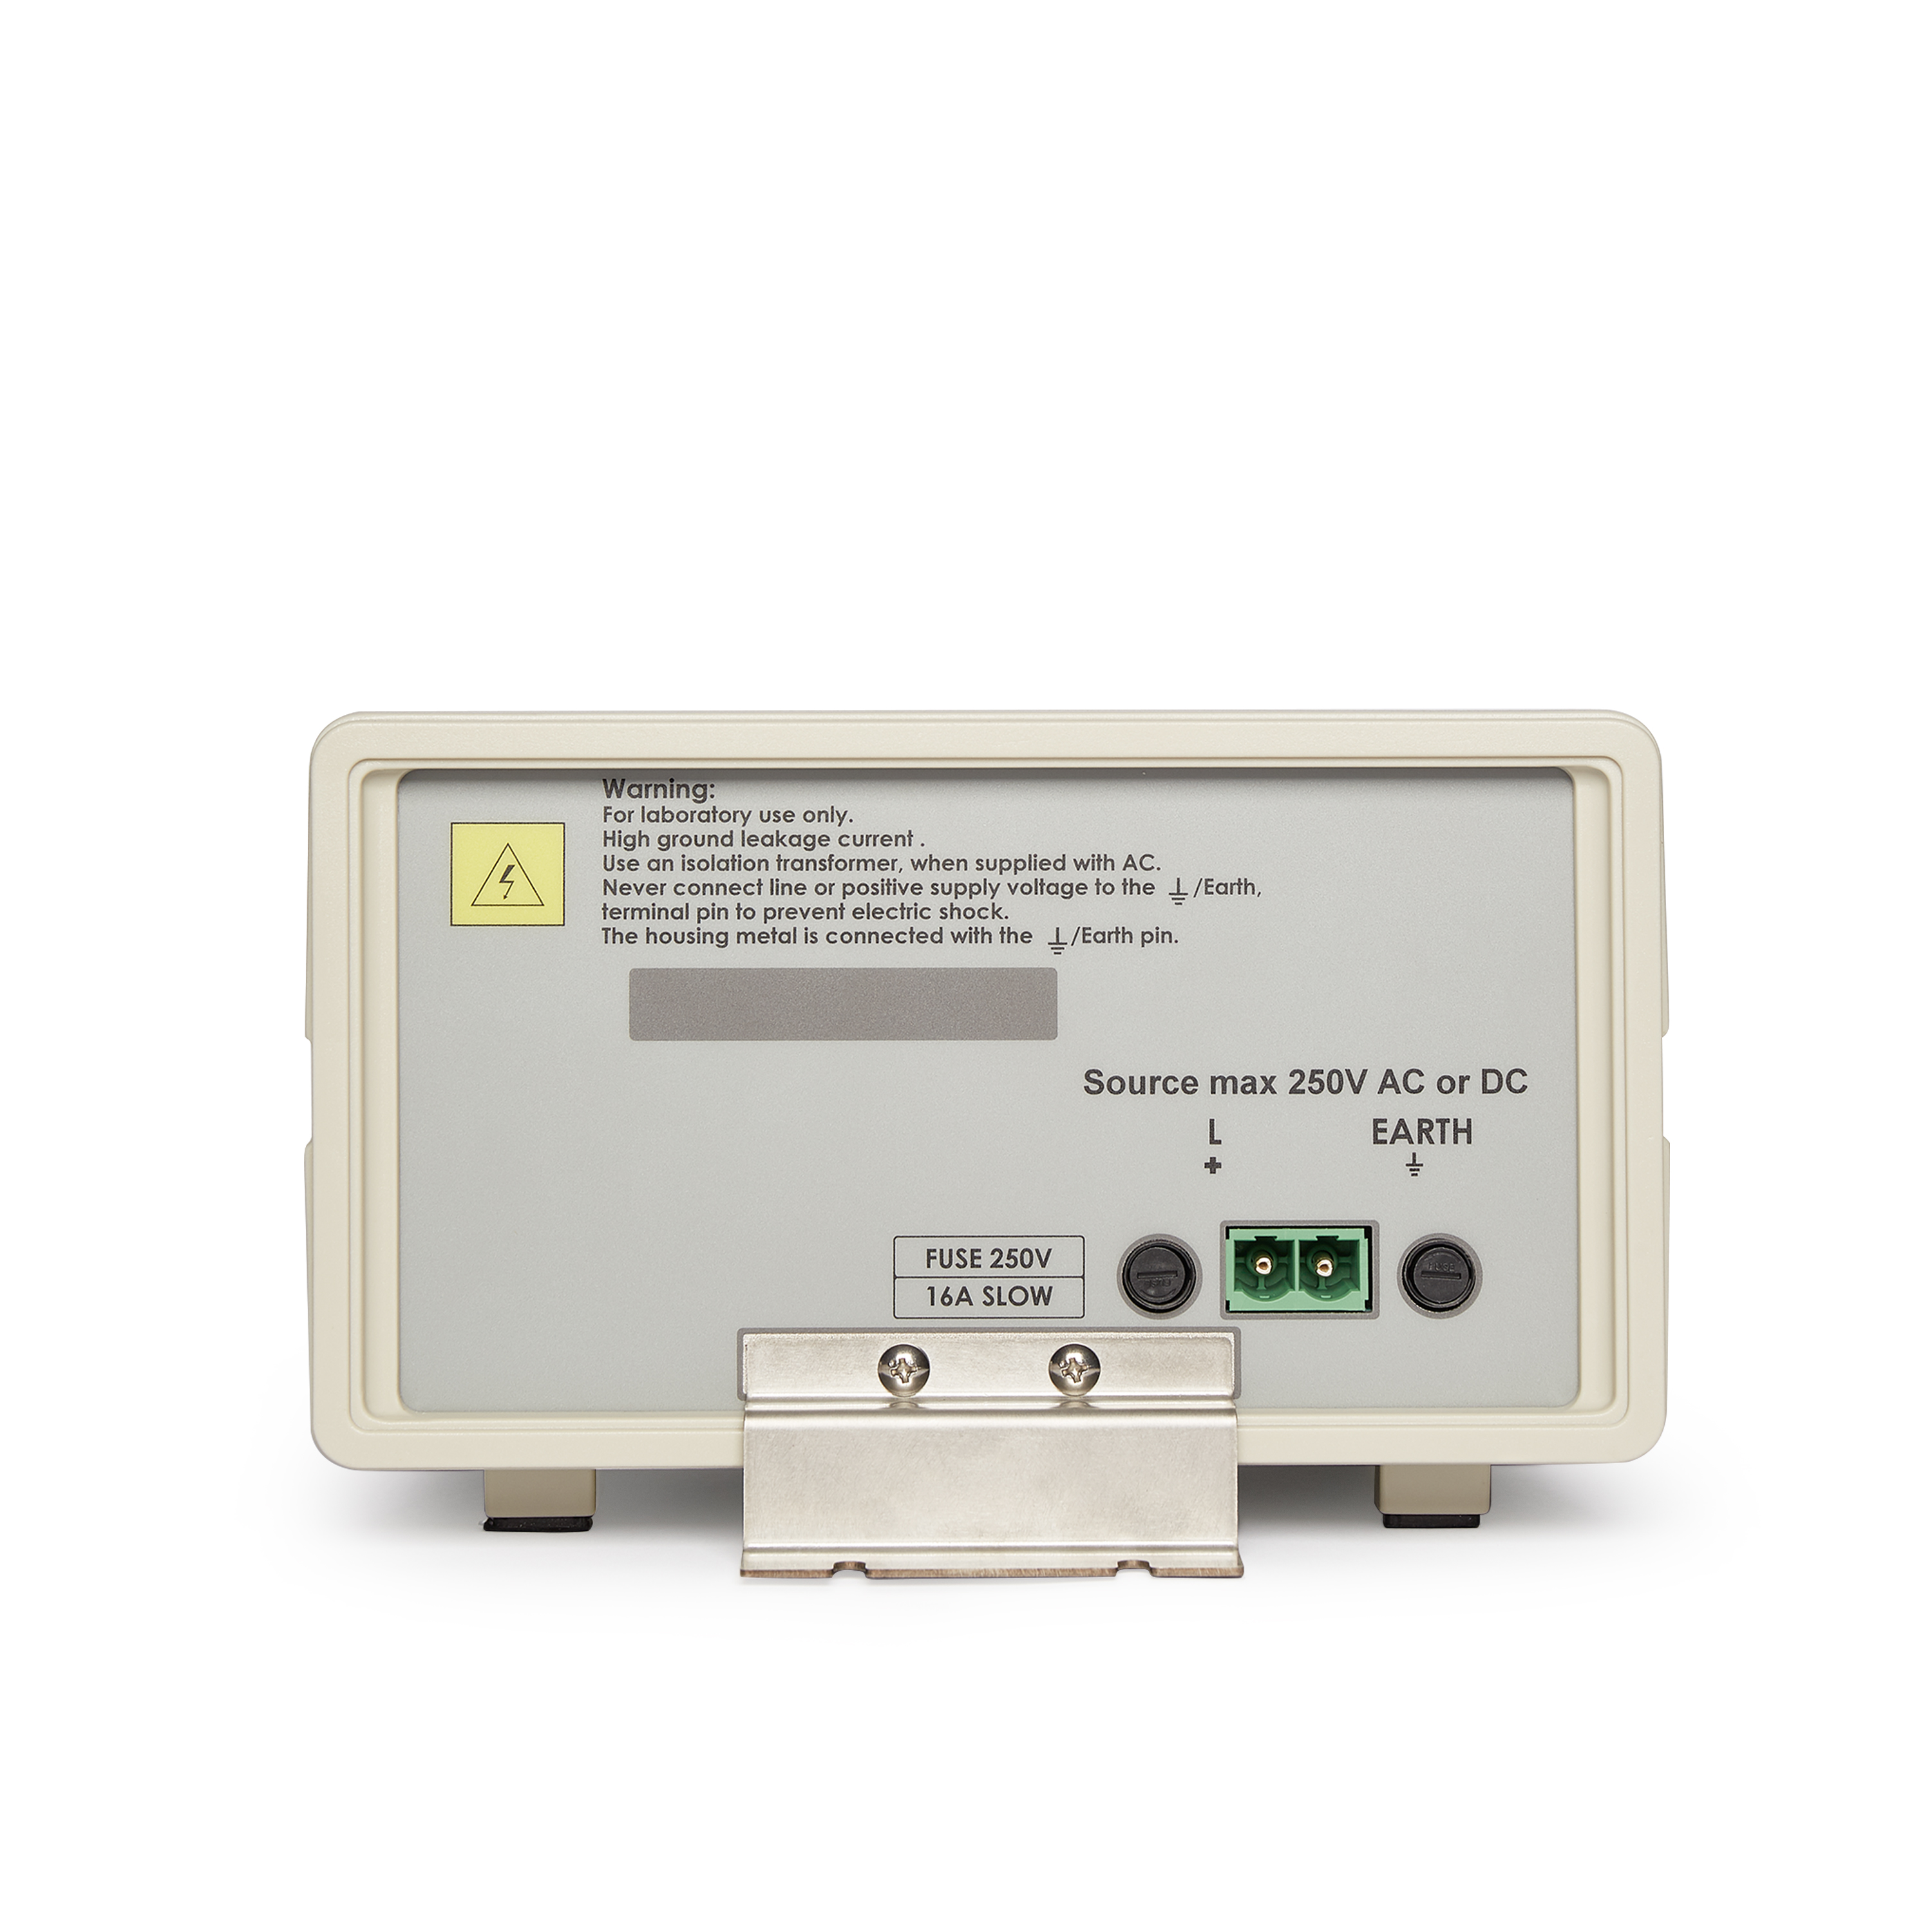 Gallery TBL5016-1 50uH 16A Line Impedance Stabilization Network LISN